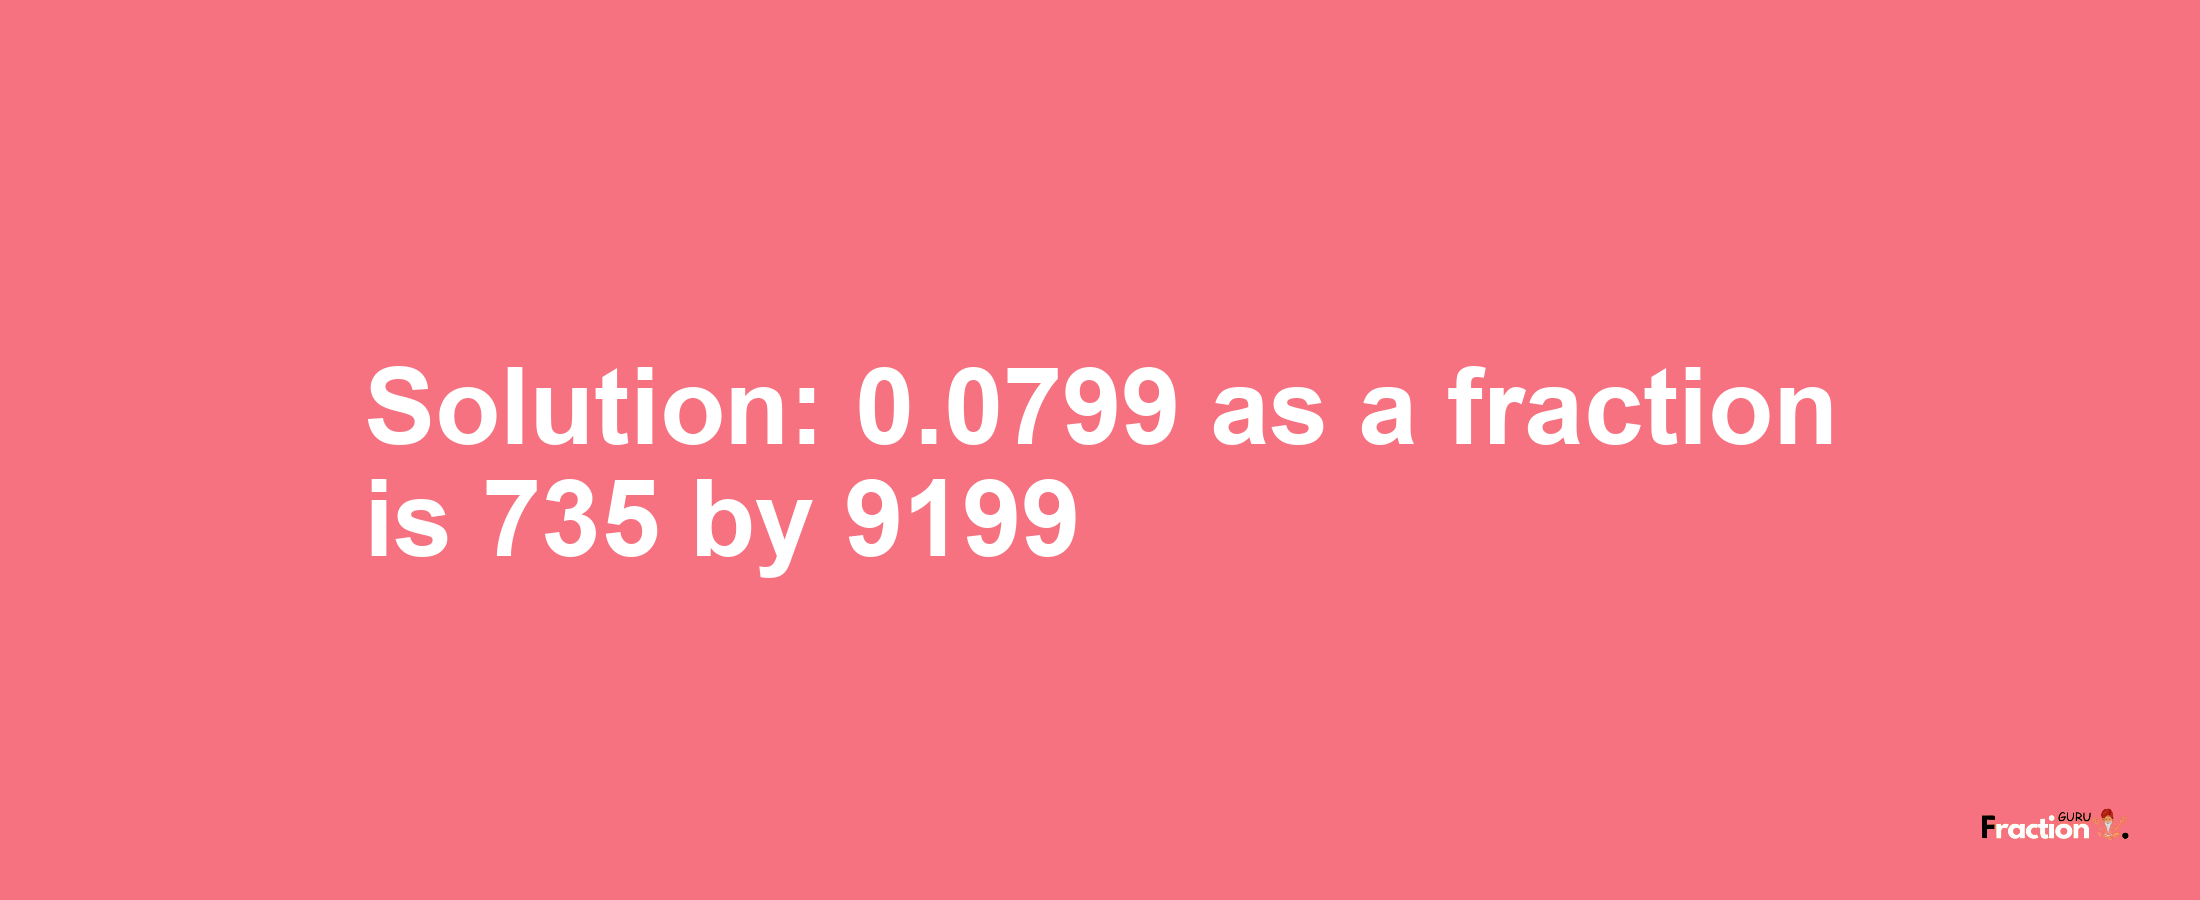 Solution:0.0799 as a fraction is 735/9199